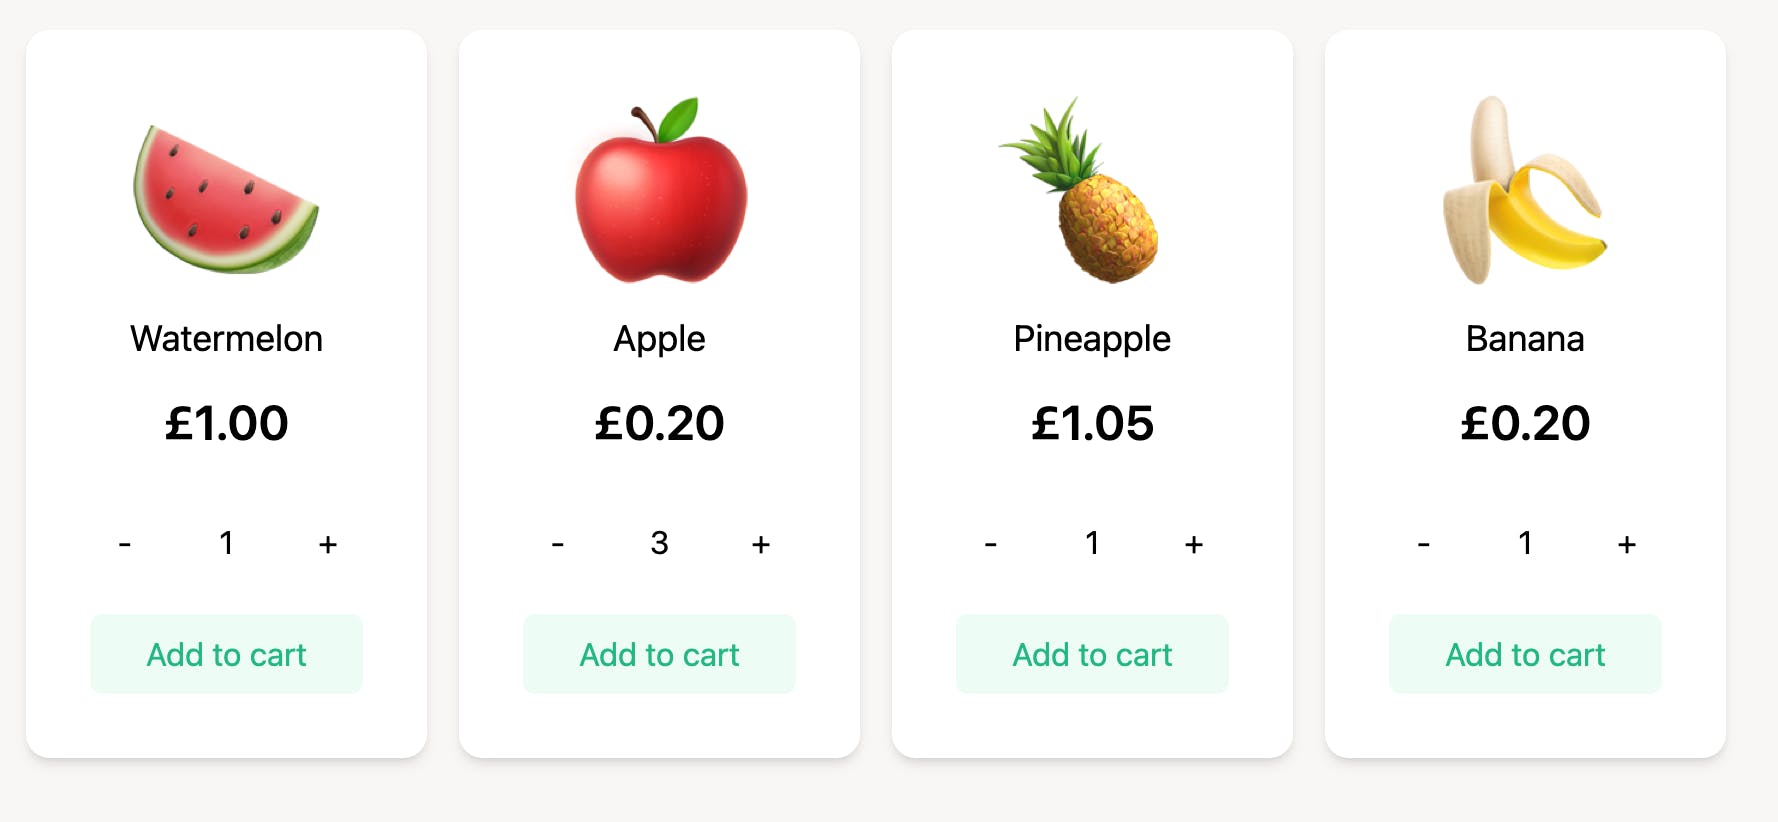 A screenshot of the fruit shop. It shows that the quantity of apples is set to 3.